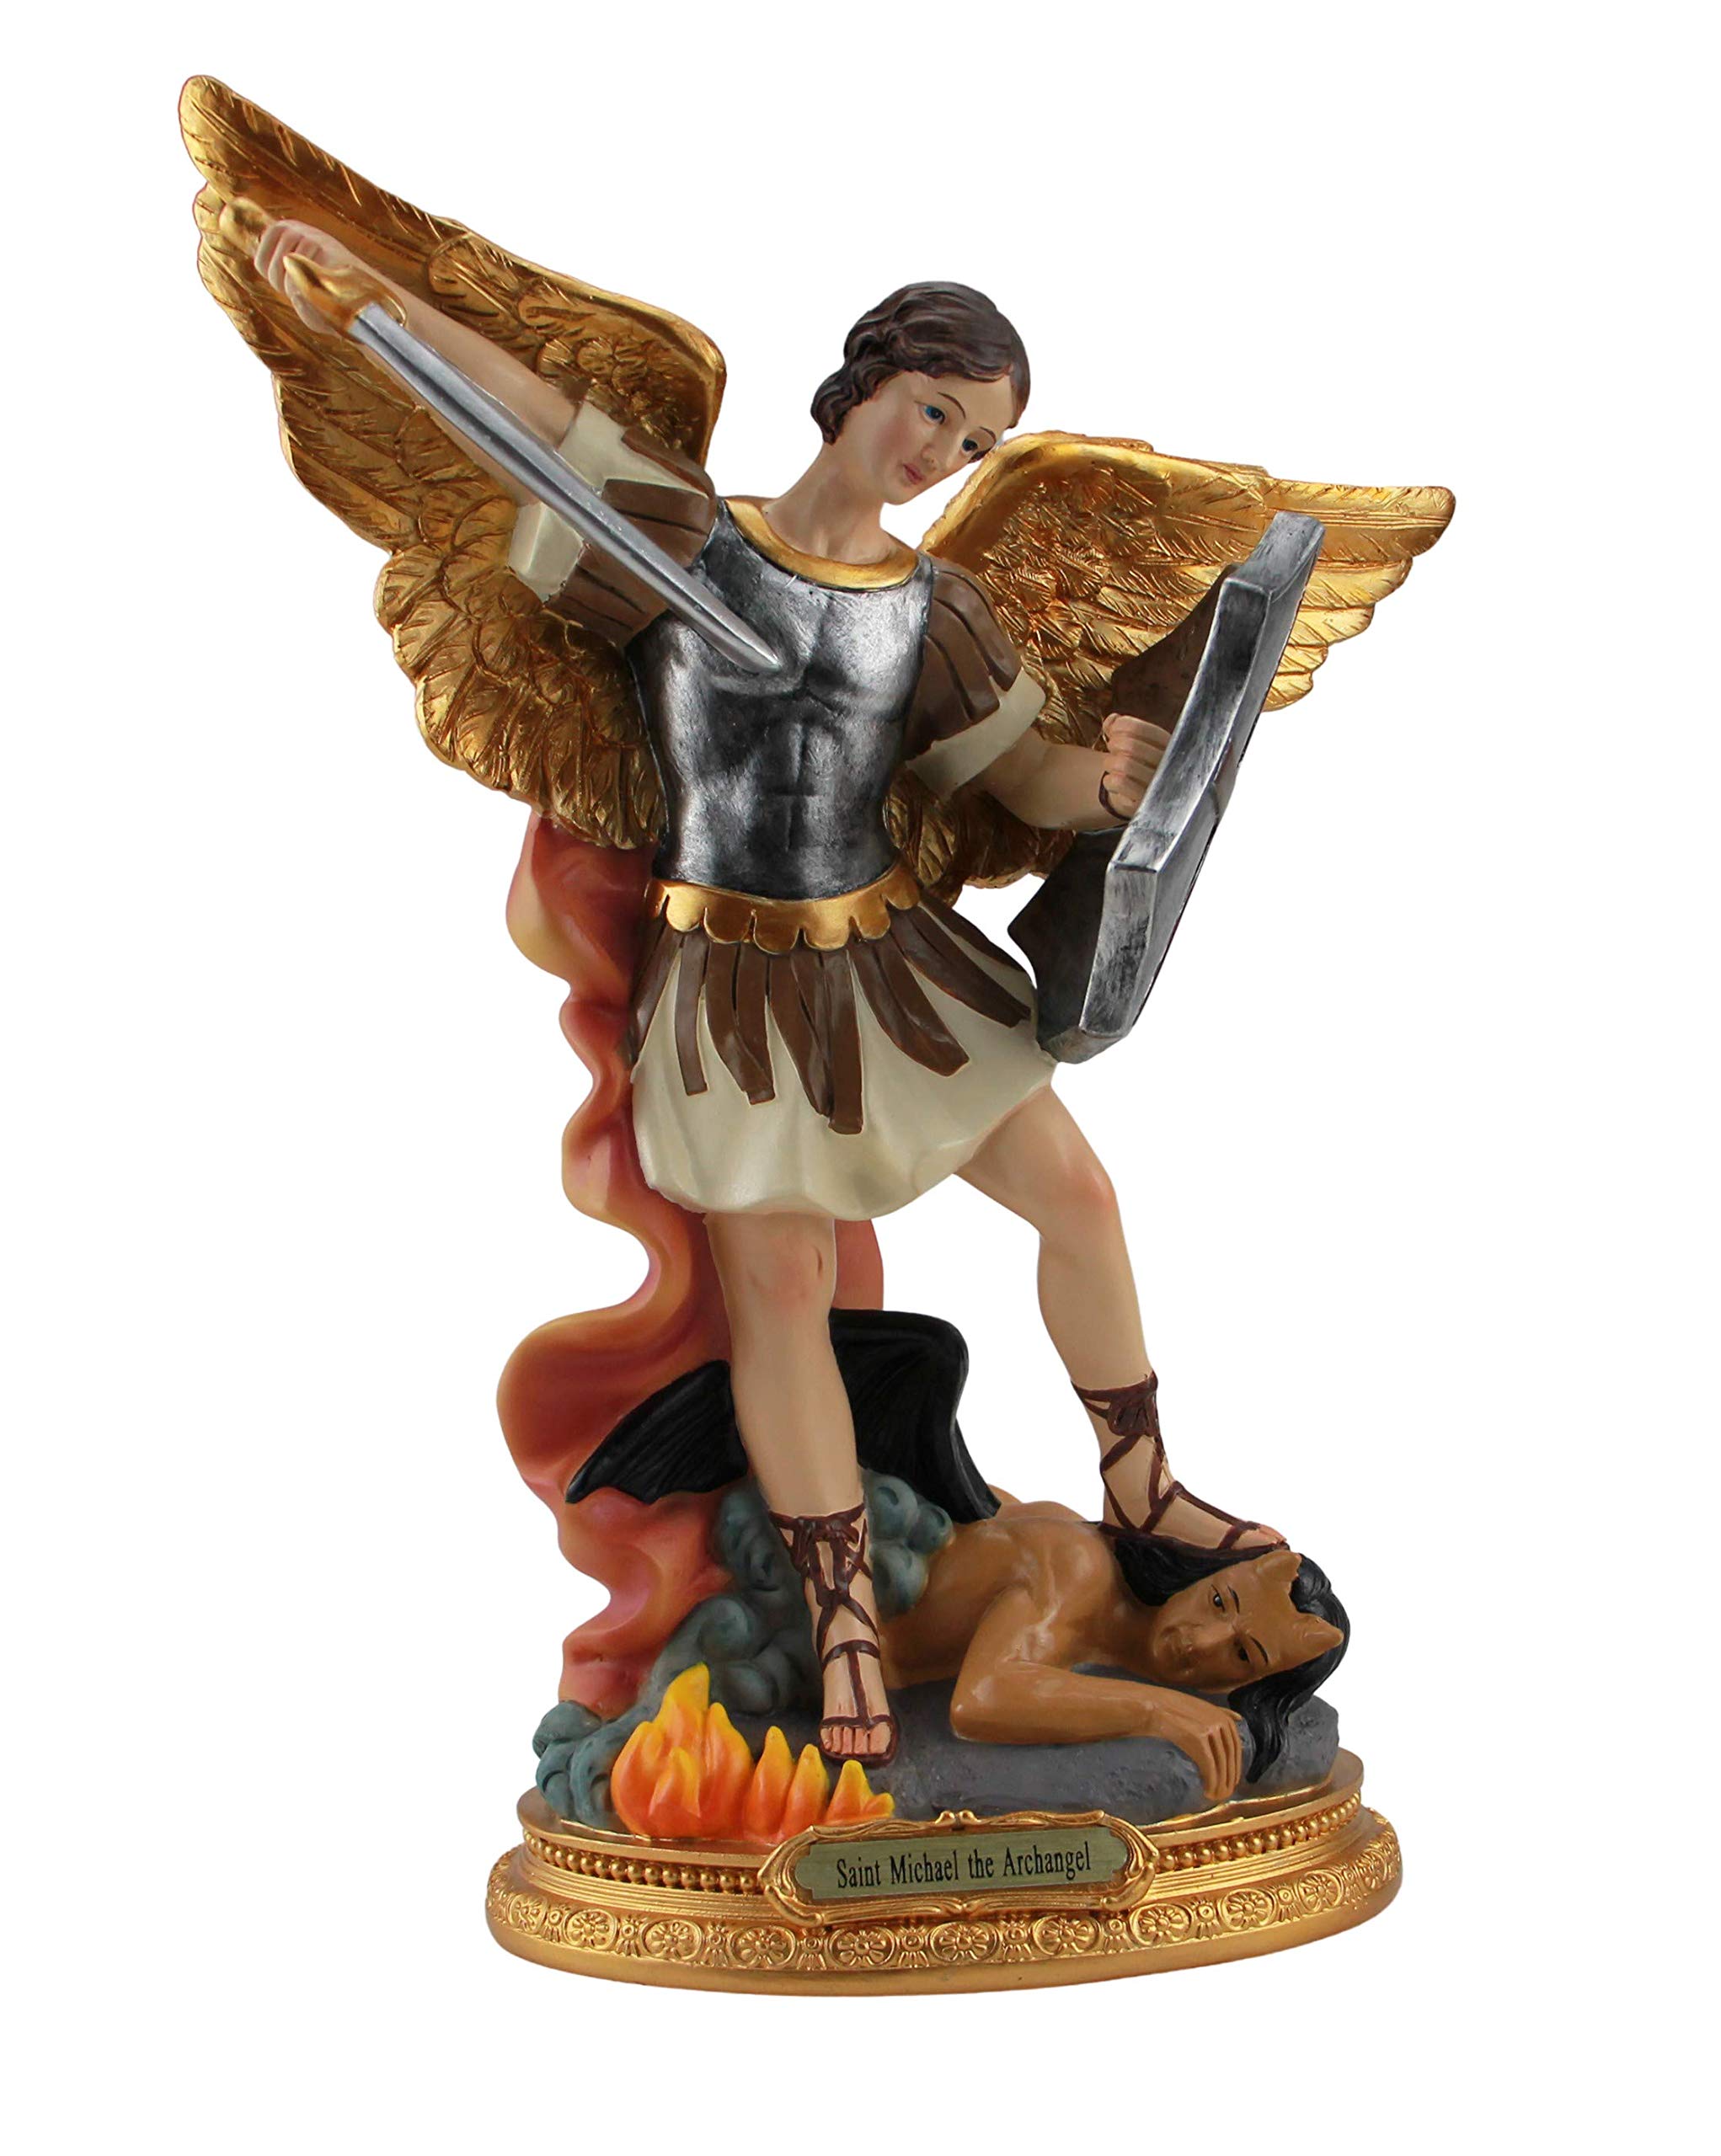 Woodington's Saint Michael The Archangel Colored Catholic Religious Gift Resin Large 12 Inch Statue